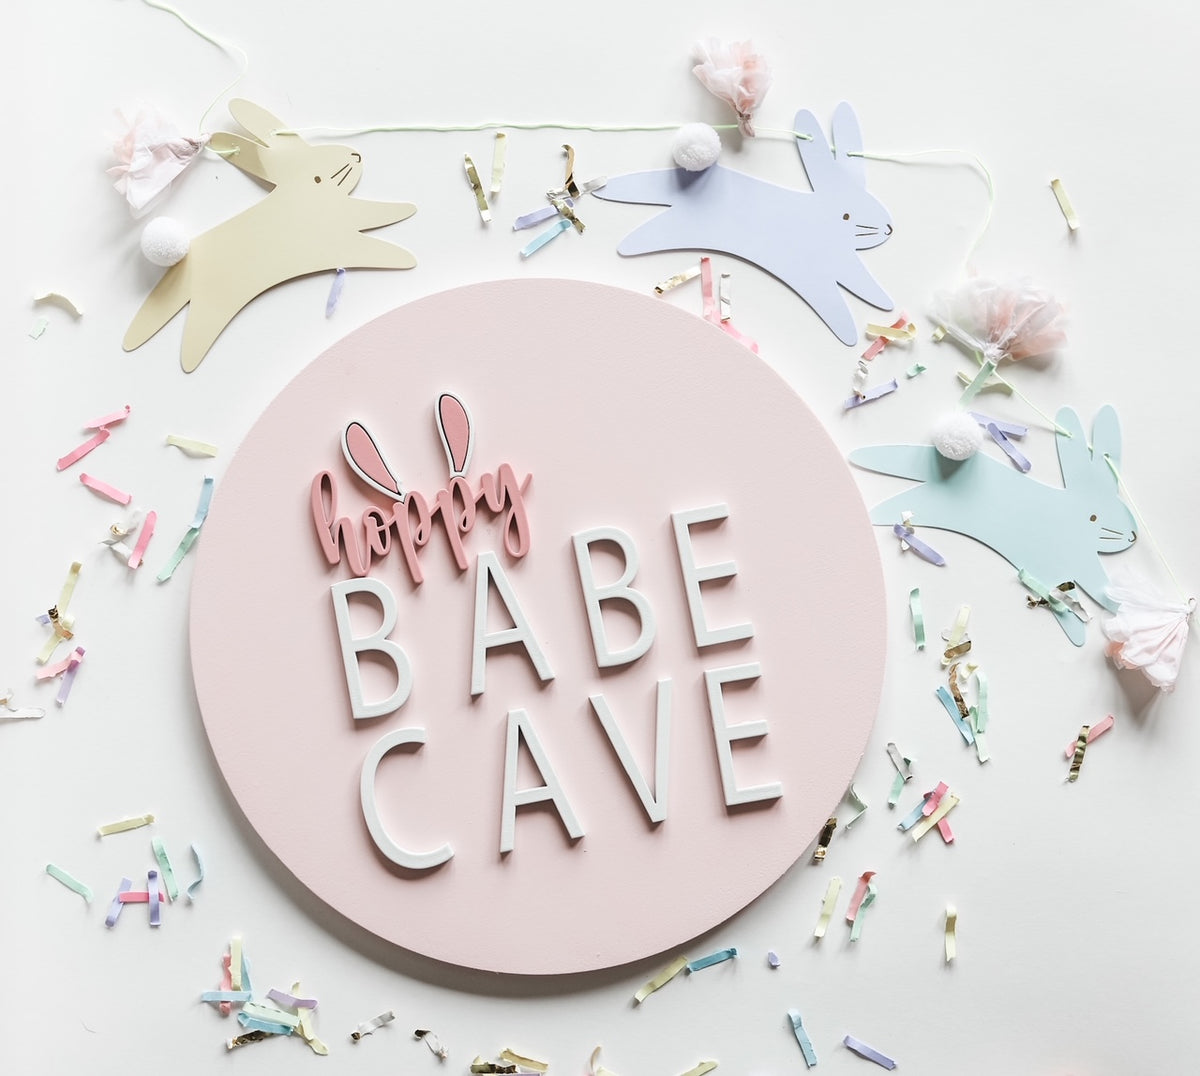 Hoppy Babe Cave 12&quot; Sign